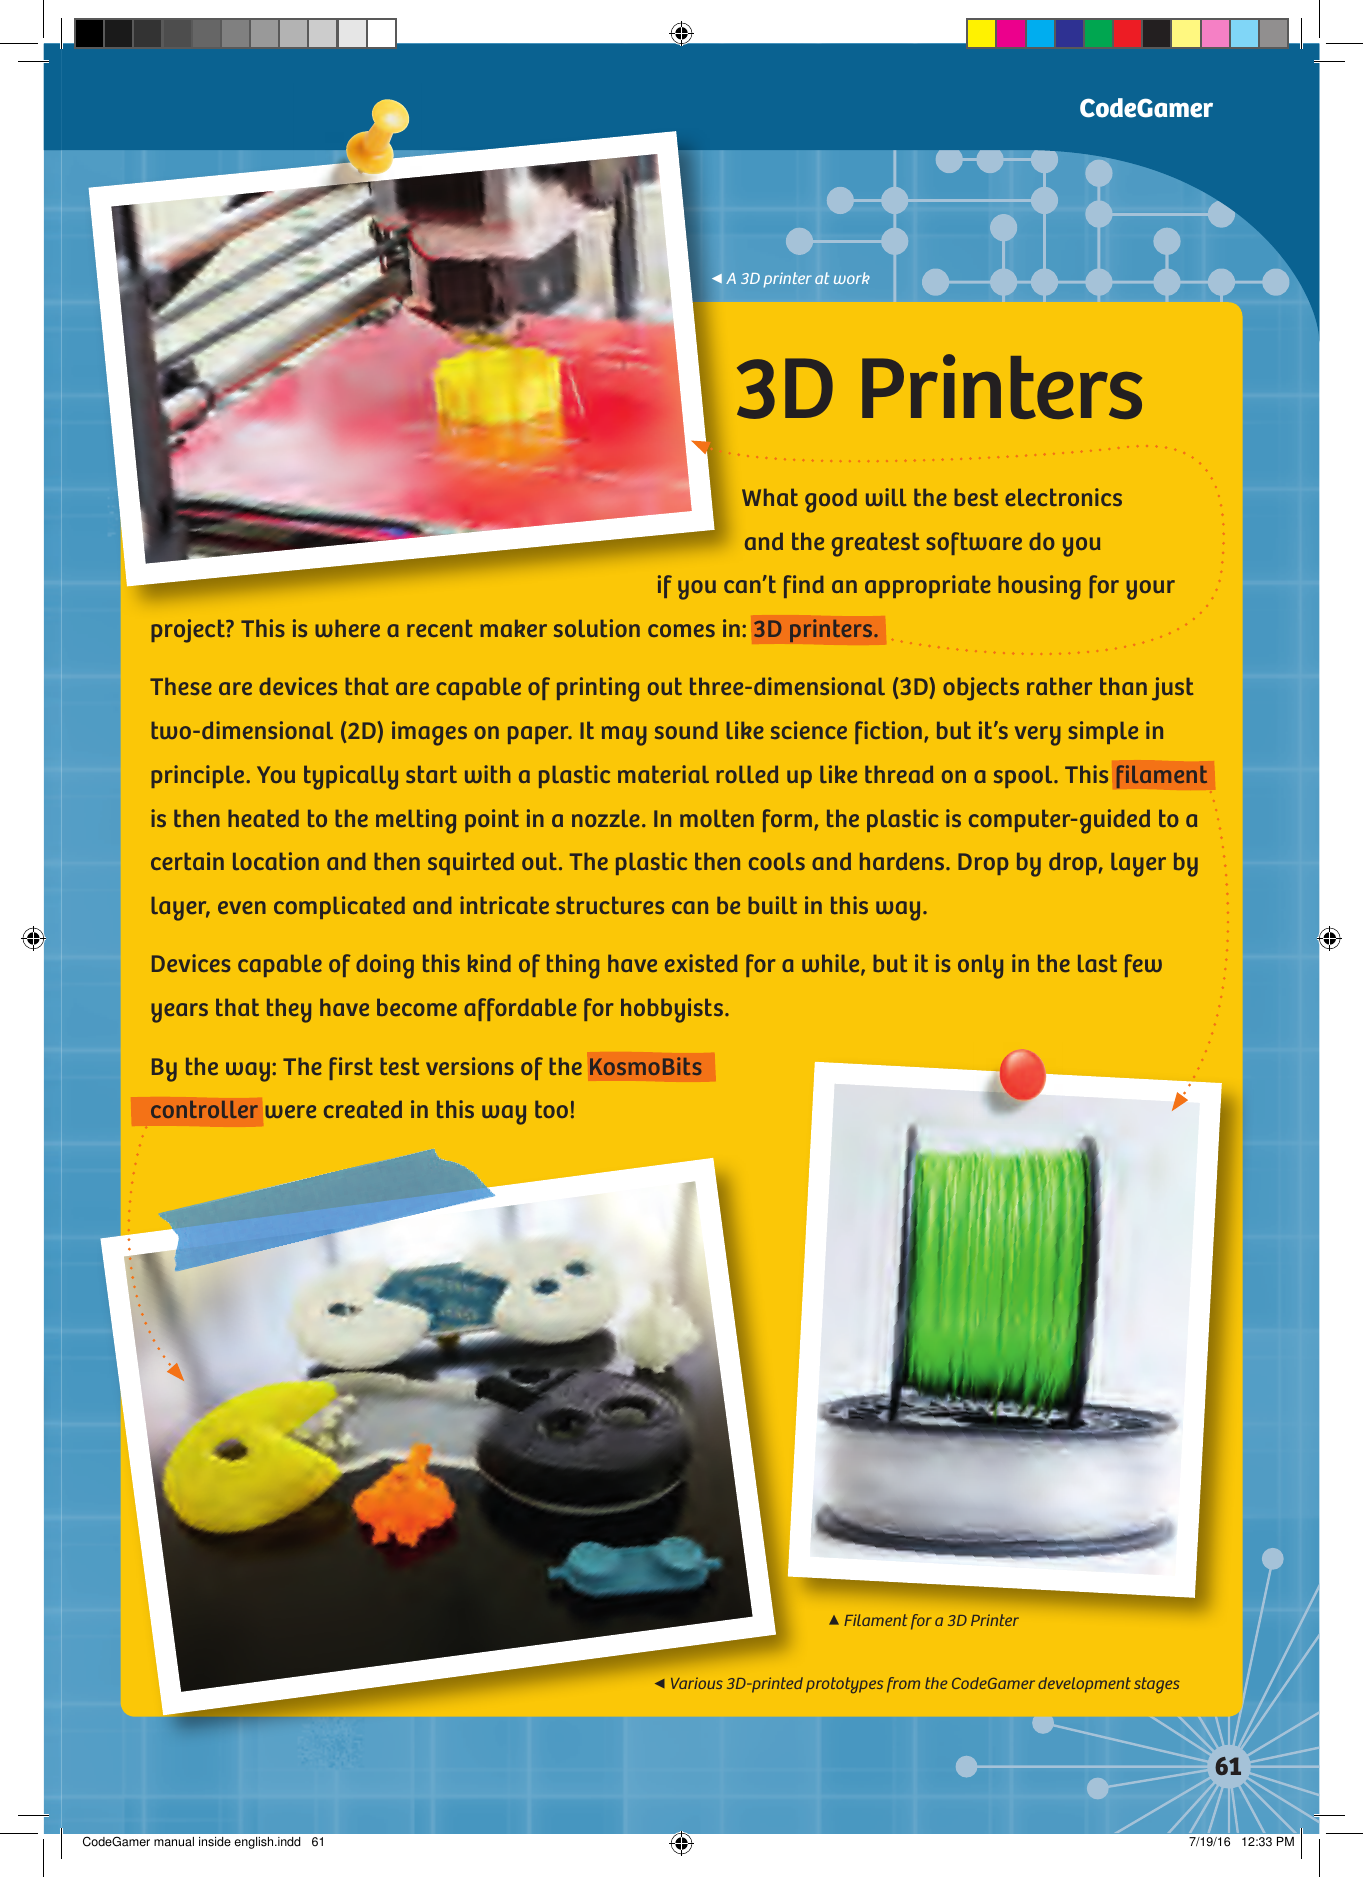 3D PrintersWhat good will the best electronics  and the greatest software do you  if you can’t find an appropriate housing for your project? This is where a recent maker solution comes in: 3D printers.These are devices that are capable of printing out three-dimensional (3D) objects rather than just two-dimensional (2D) images on paper. It may sound like science fiction, but it’s very simple in principle. You typically start with a plastic material rolled up like thread on a spool. This filament is then heated to the melting point in a nozzle. In molten form, the plastic is computer-guided to a certain location and then squirted out. The plastic then cools and hardens. Drop by drop, layer by layer, even complicated and intricate structures can be built in this way.Devices capable of doing this kind of thing have existed for a while, but it is only in the last few years that they have become affordable for hobbyists.By the way: The first test versions of the KosmoBits controller were created in this way too!CodeGamer◀A 3D printer at work◀Various 3D-printed prototypes from the CodeGamer development stages▲Filament for a 3D PrinterCodeGamer manual inside english.indd   61 7/19/16   12:33 PM